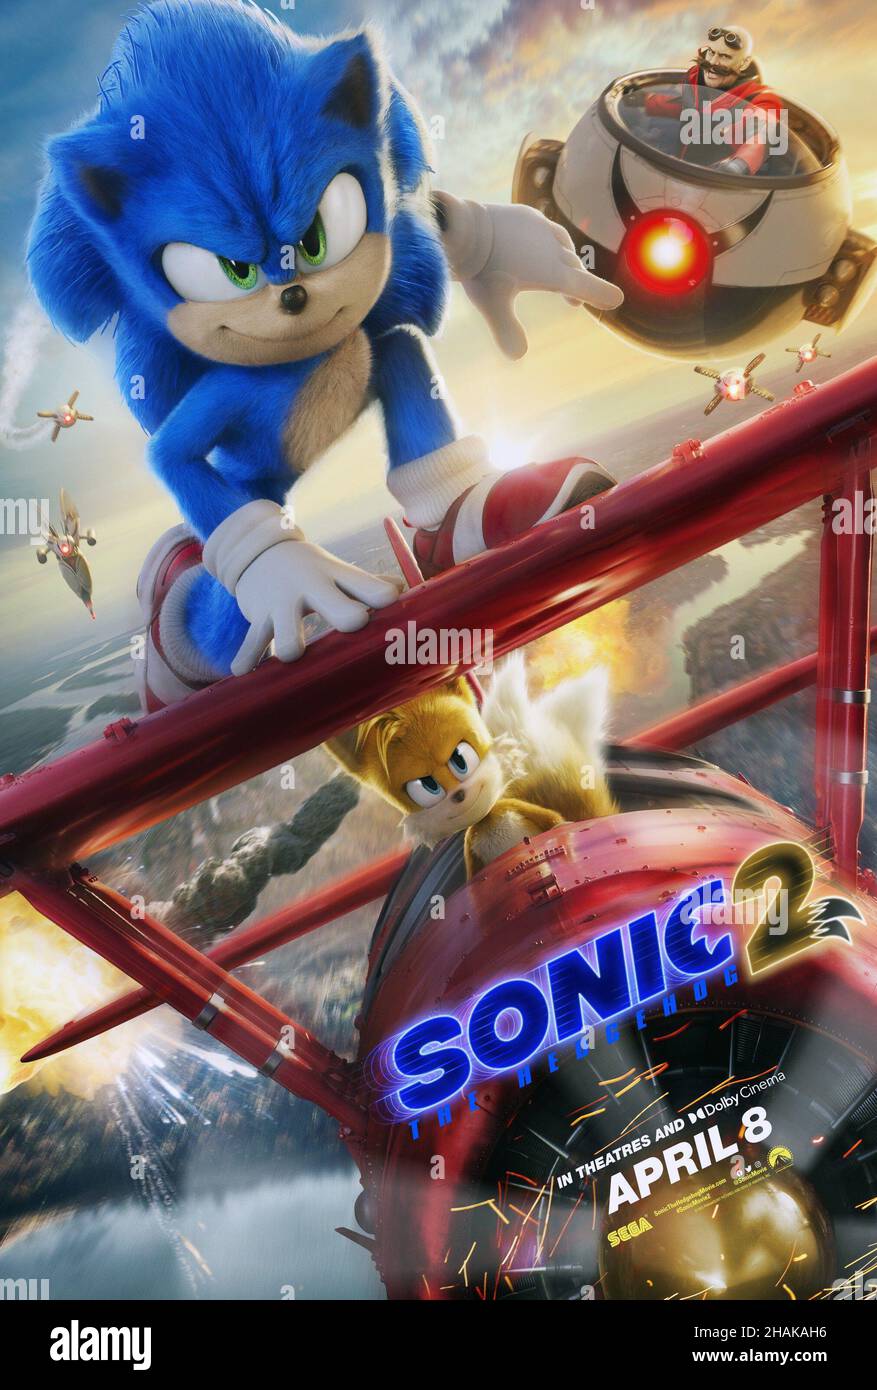 SONIC THE HEDGEHOG 2, advance Dolby Cinema poster, foreground from